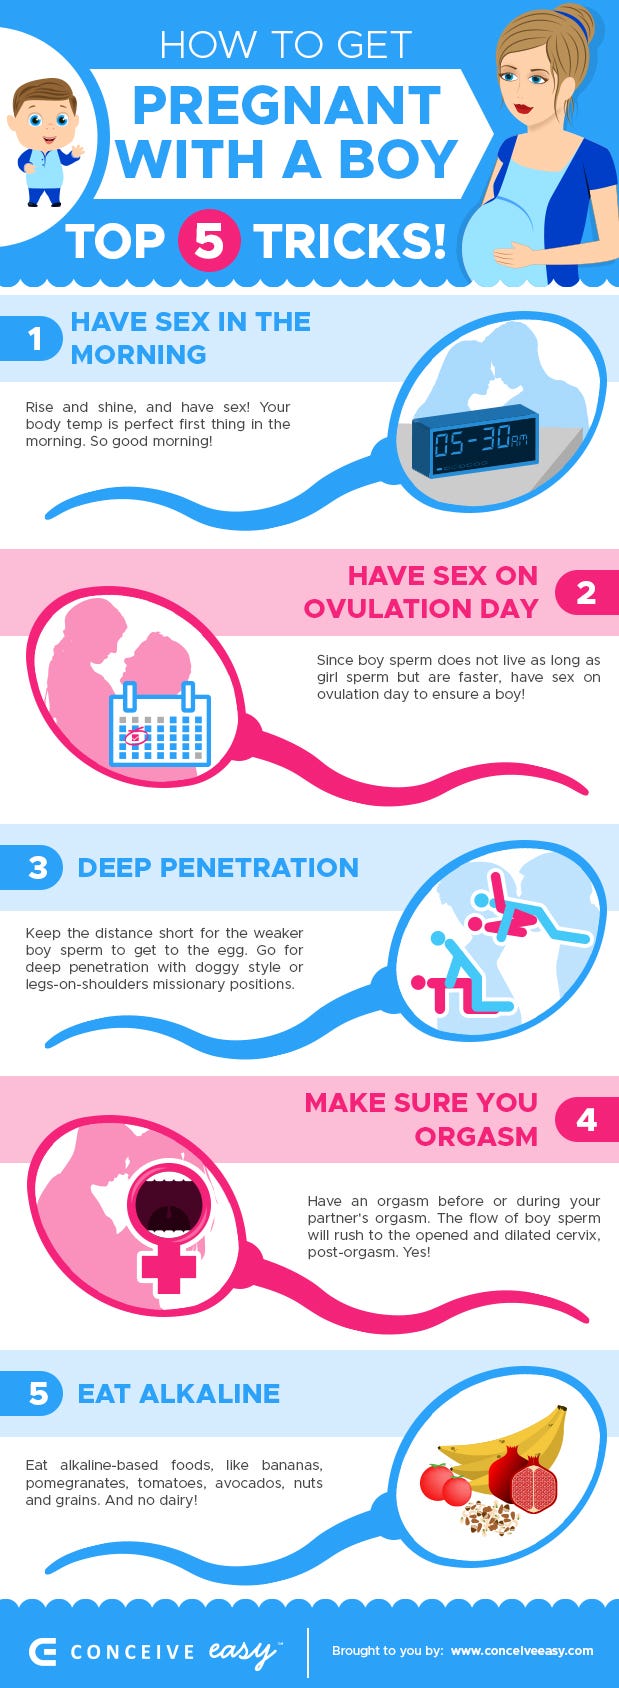 Top 5 Tricks How to Get Pregnant with a Boy Infographic, by Conceive Easy